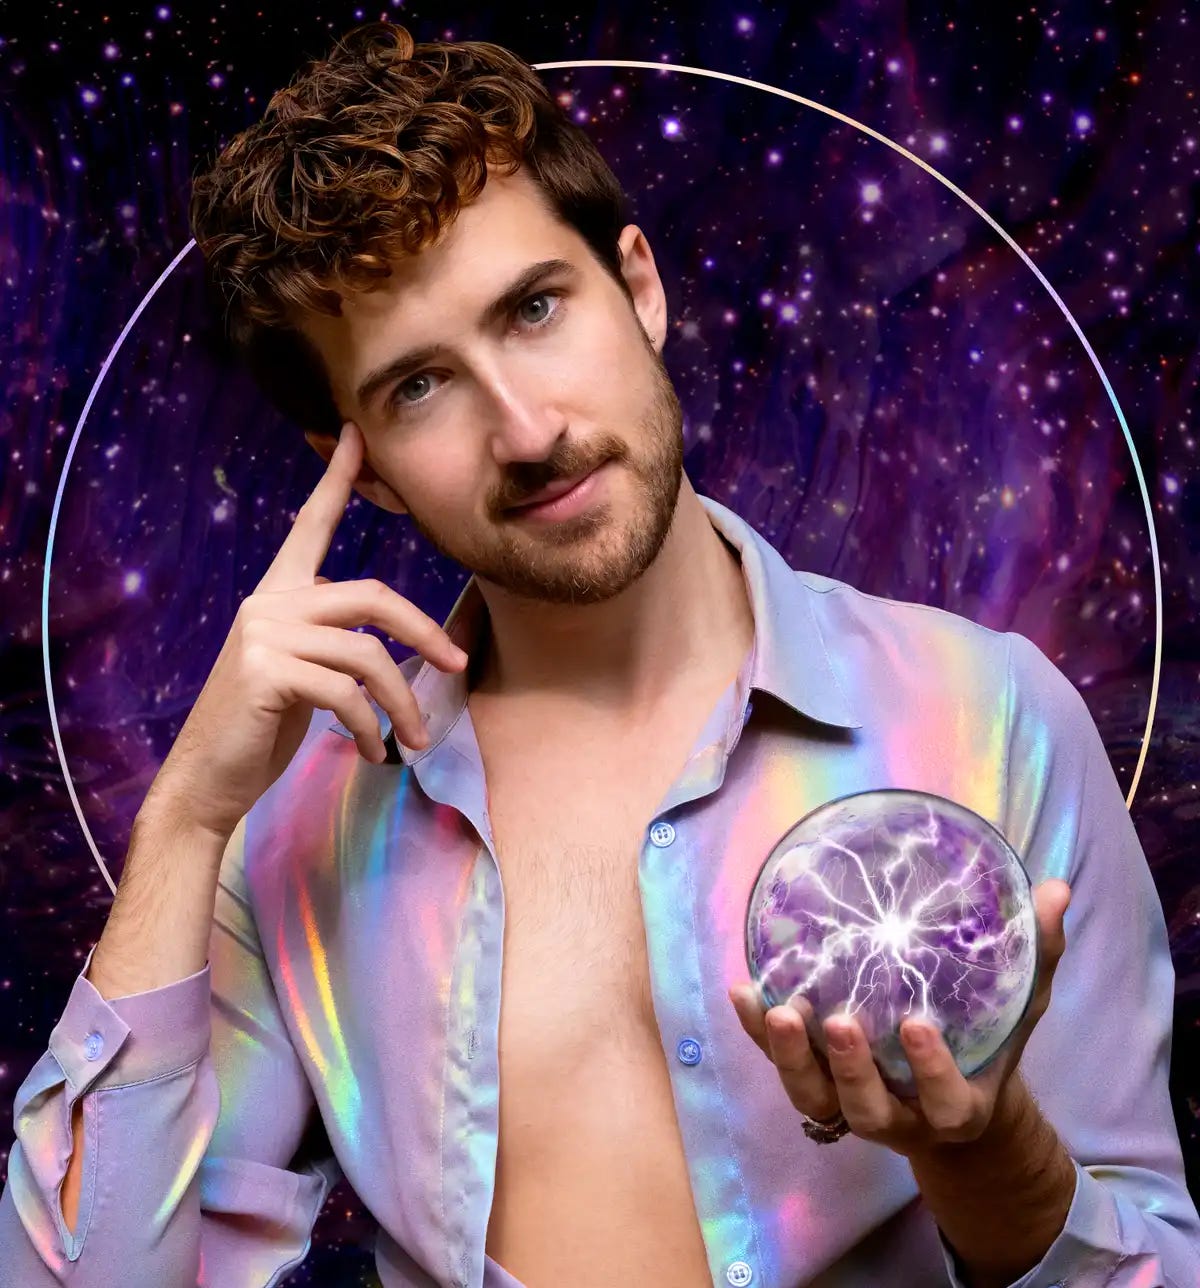 A white, brunette man with a mustache wears a rainbow shirt and holds a purple crystal ball in front of a background of a starry sky